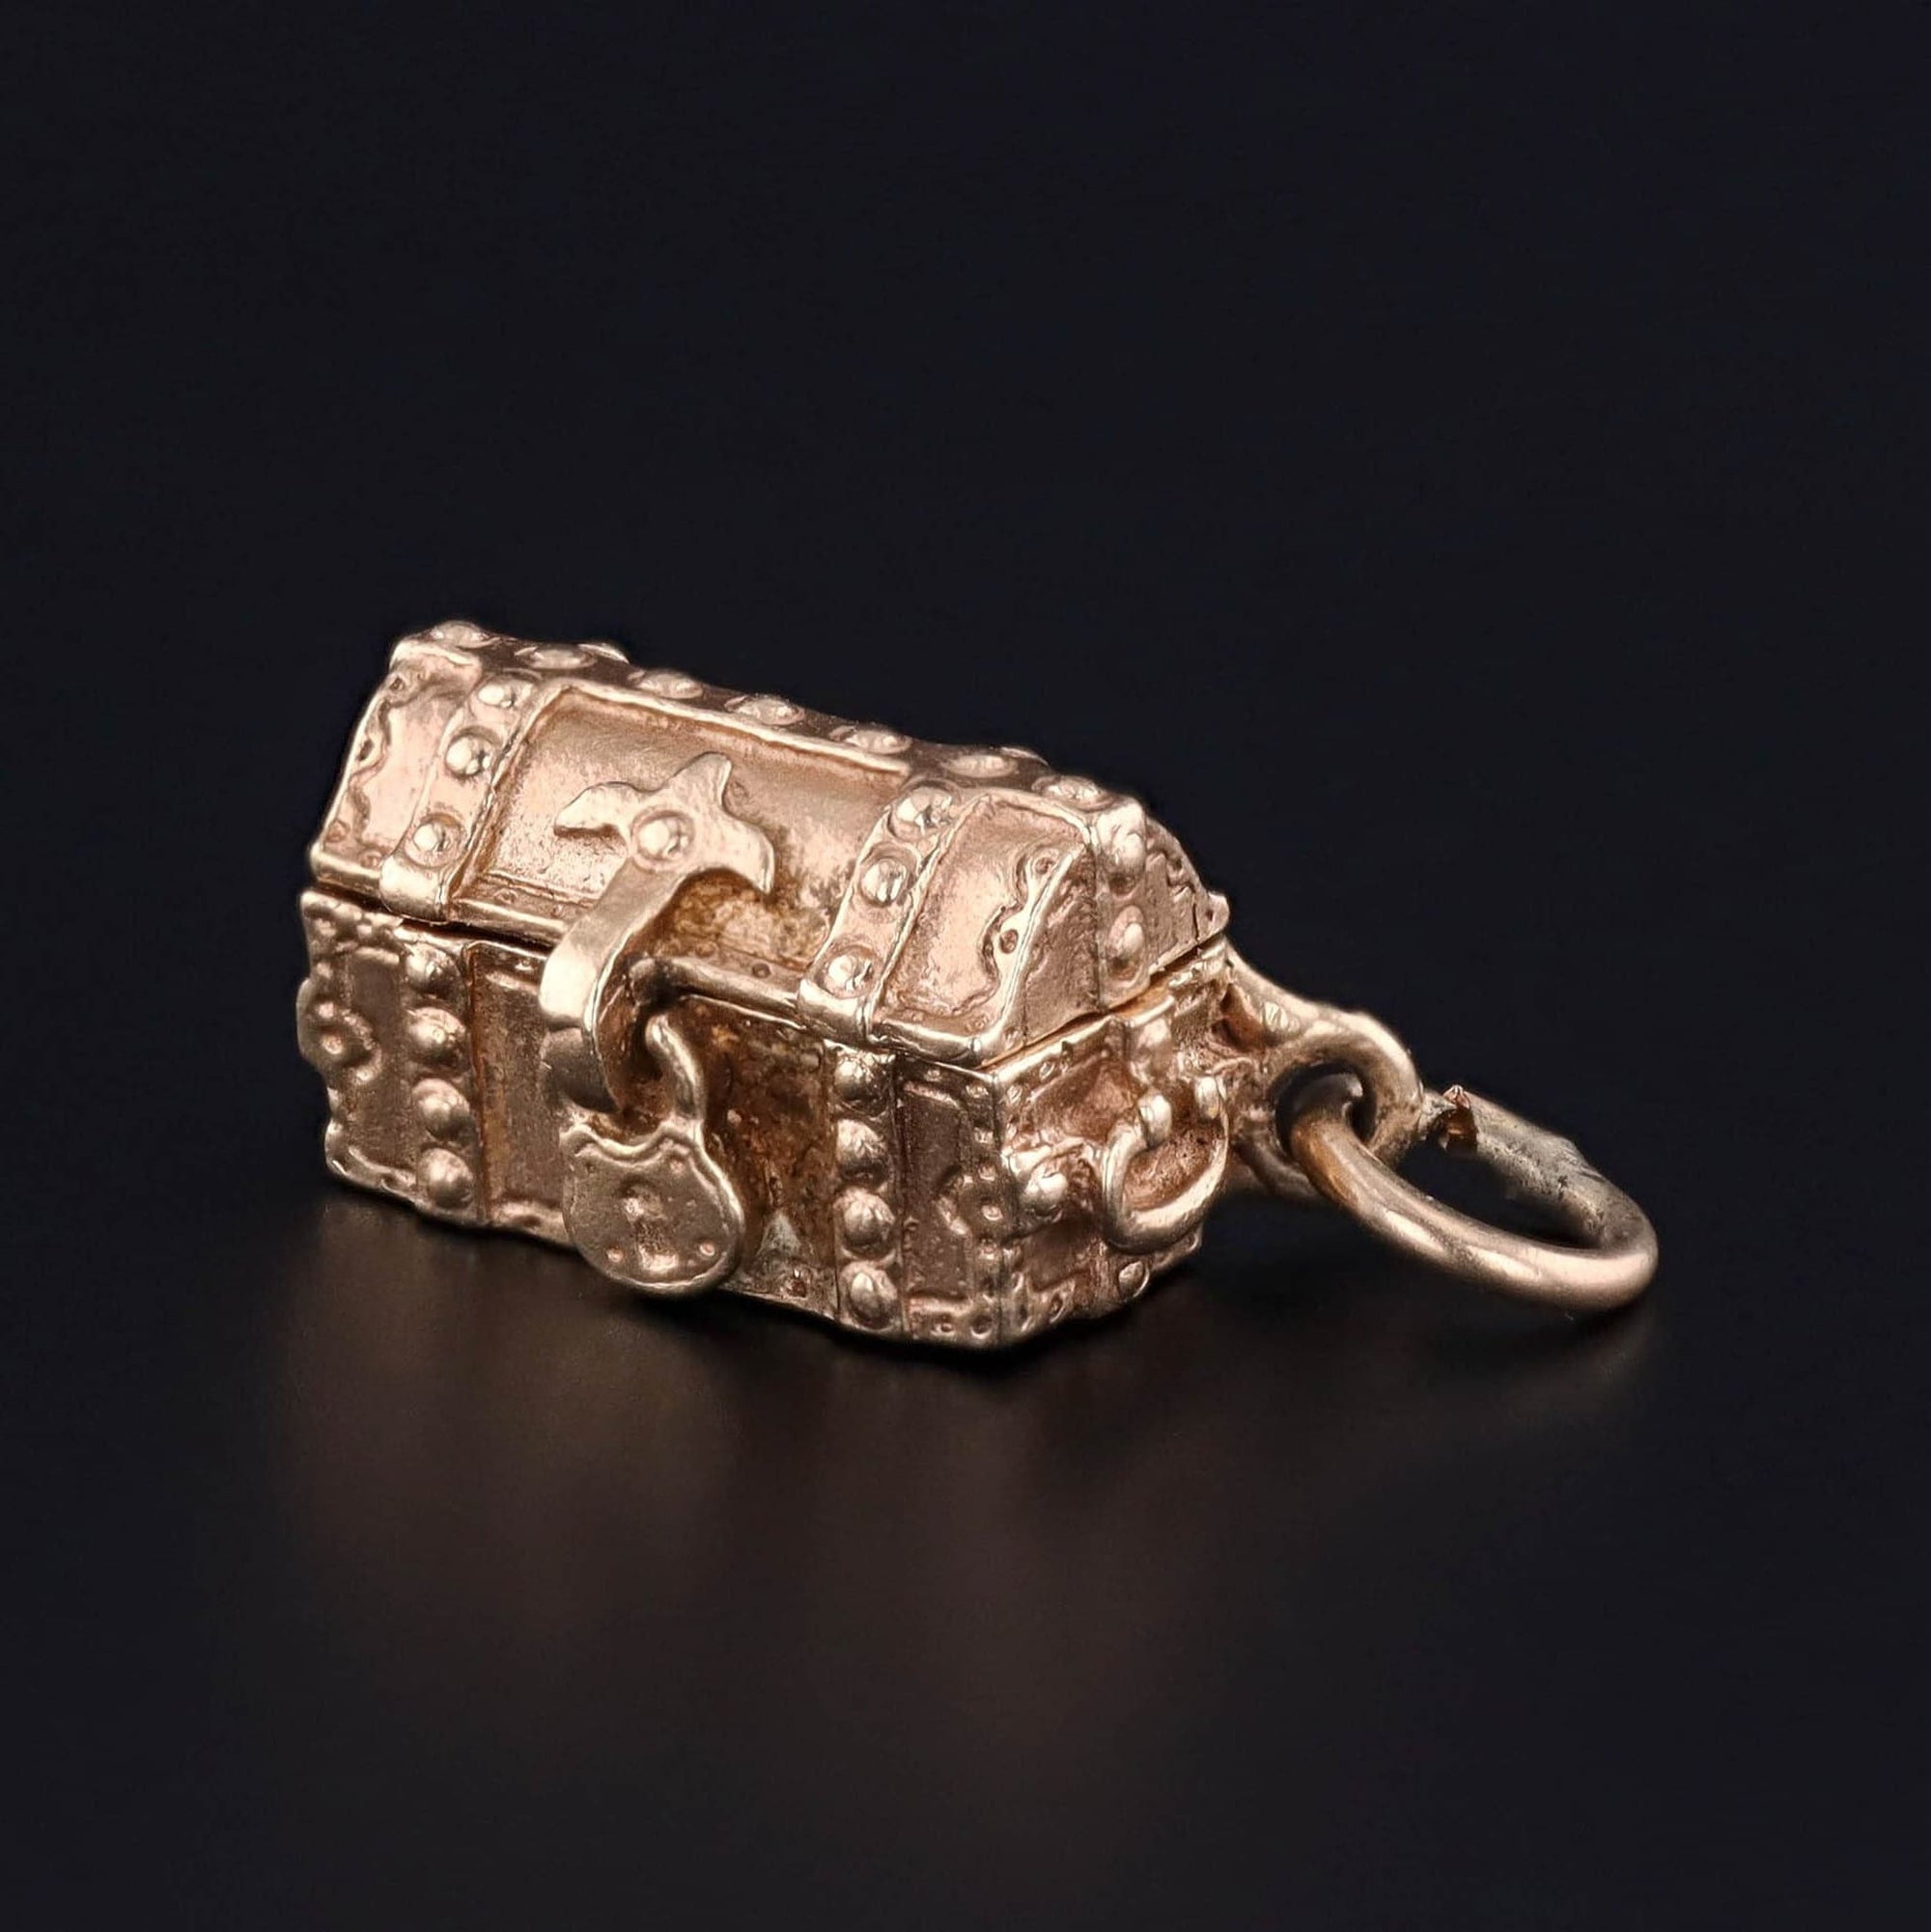 Vintage Treasure Chest Charm of 14k Gold